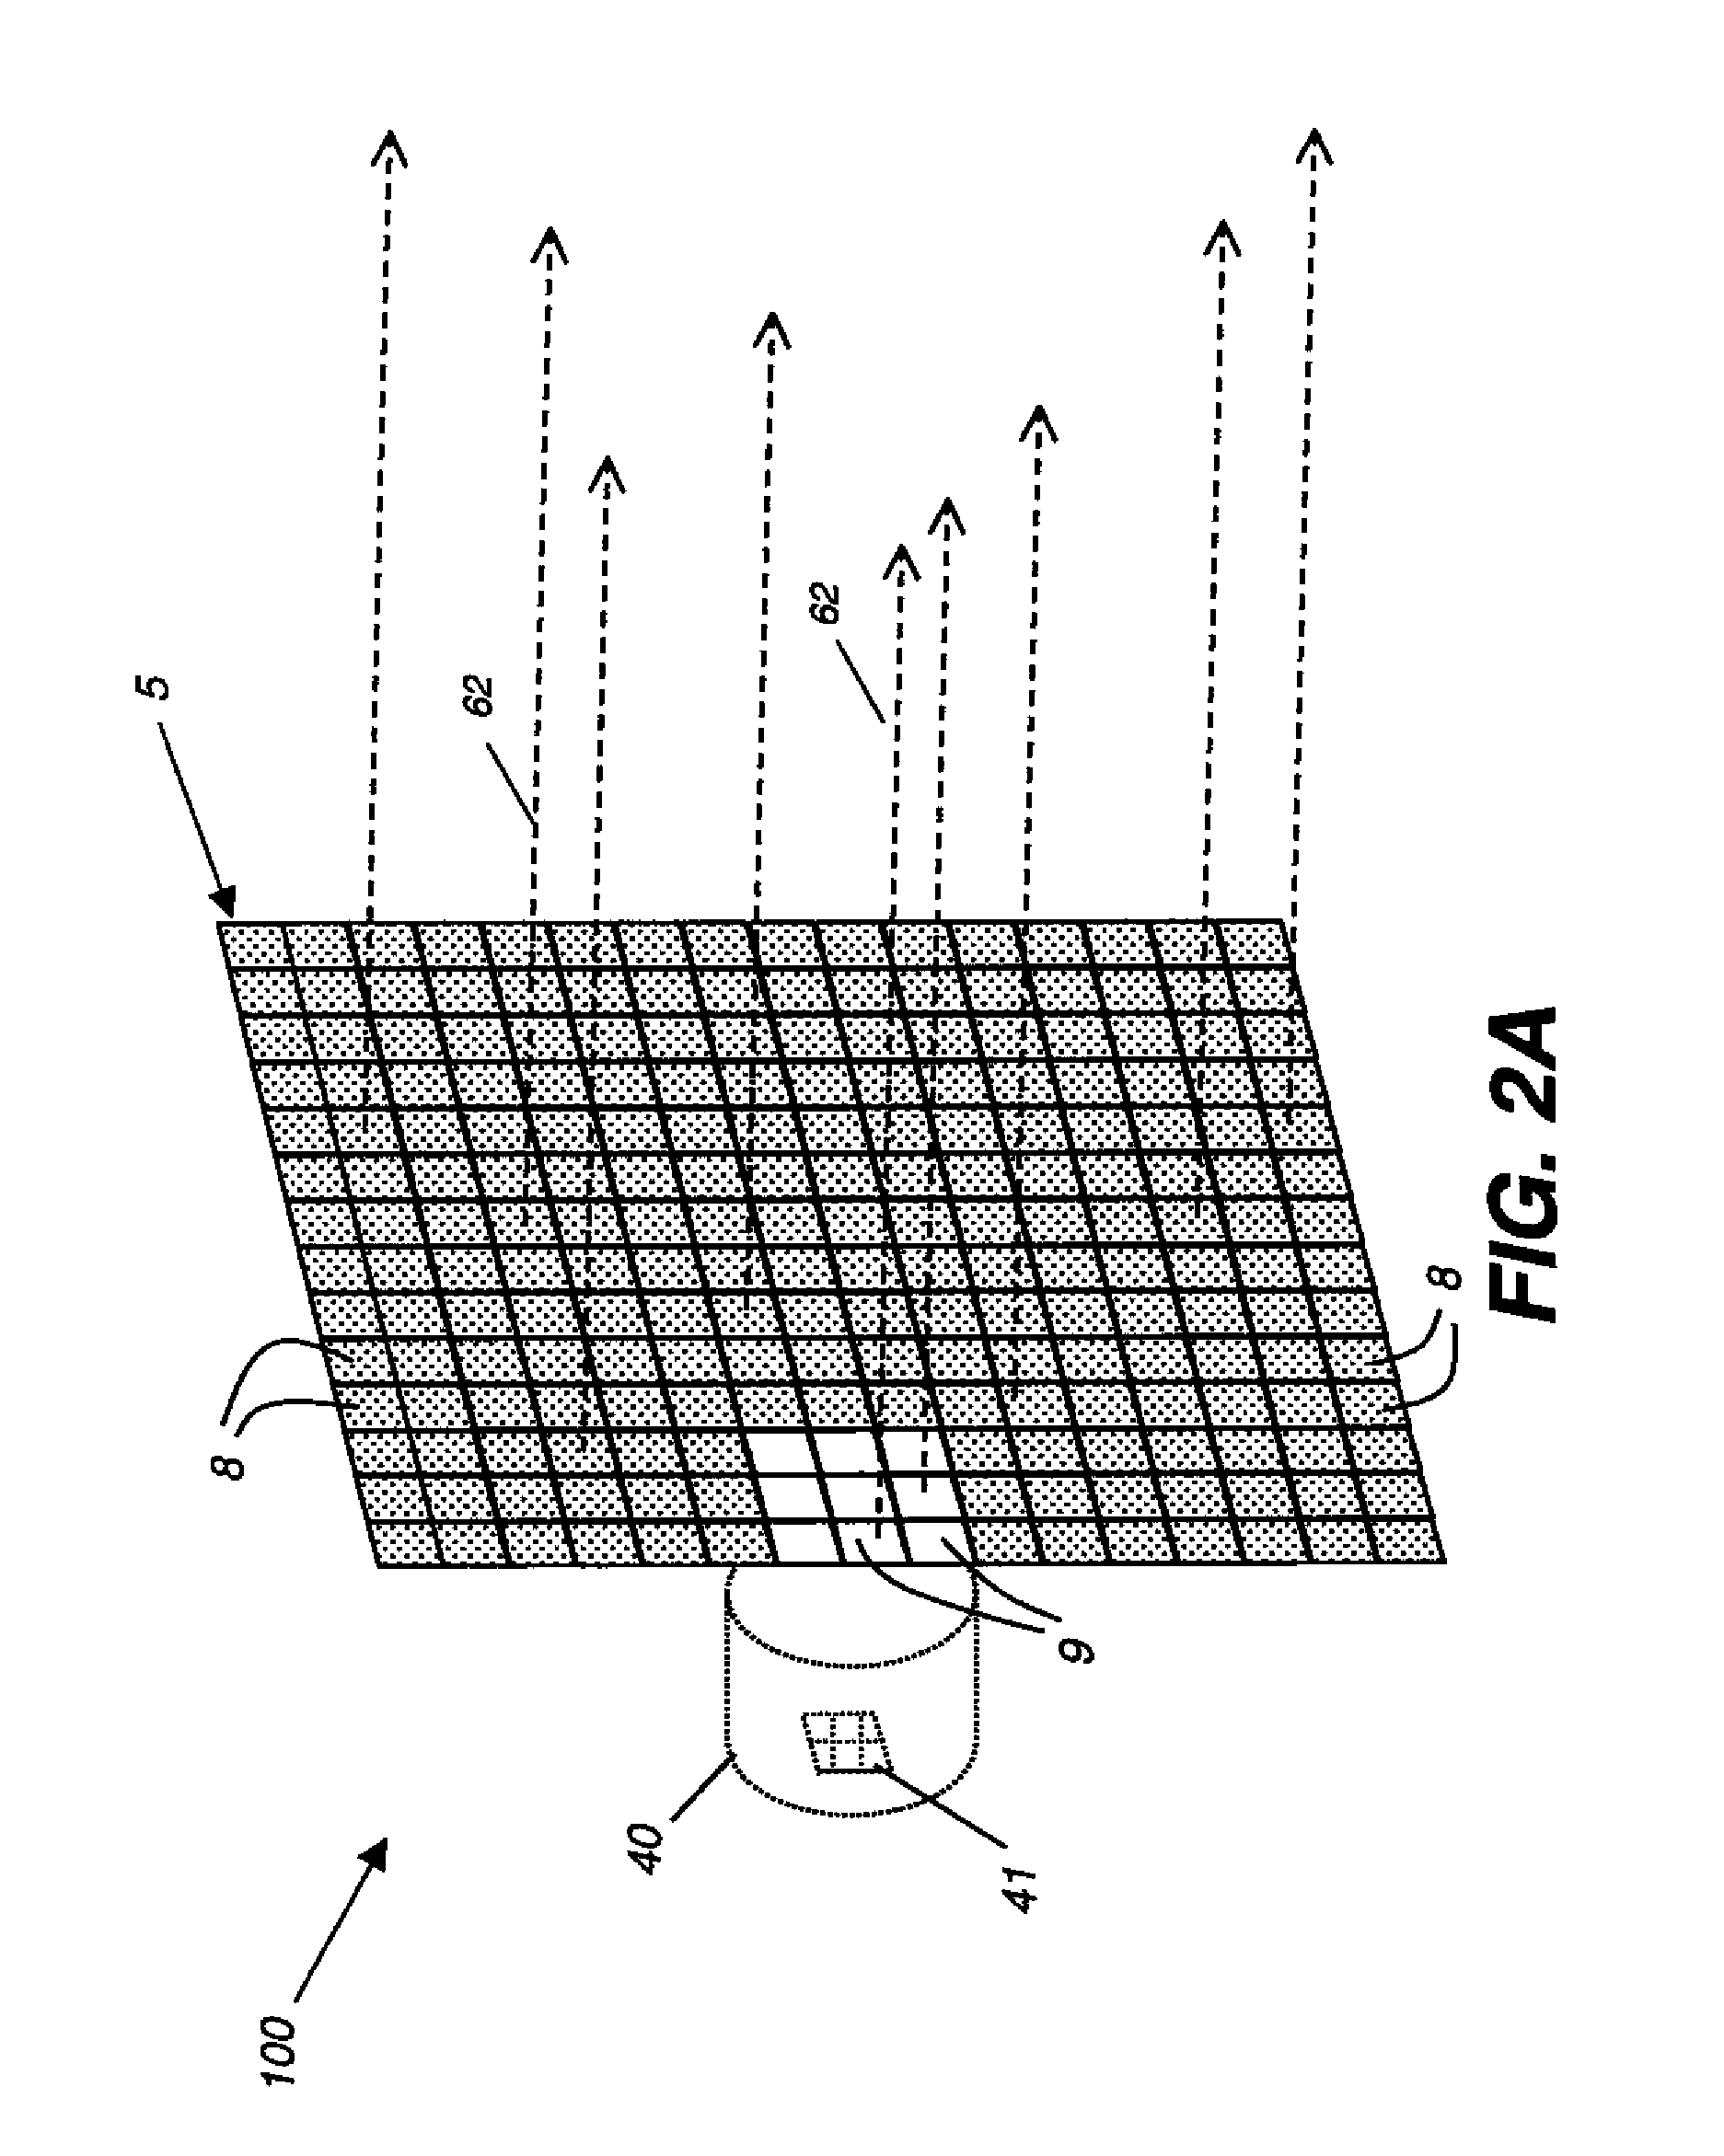 Integrated display and capture apparatus